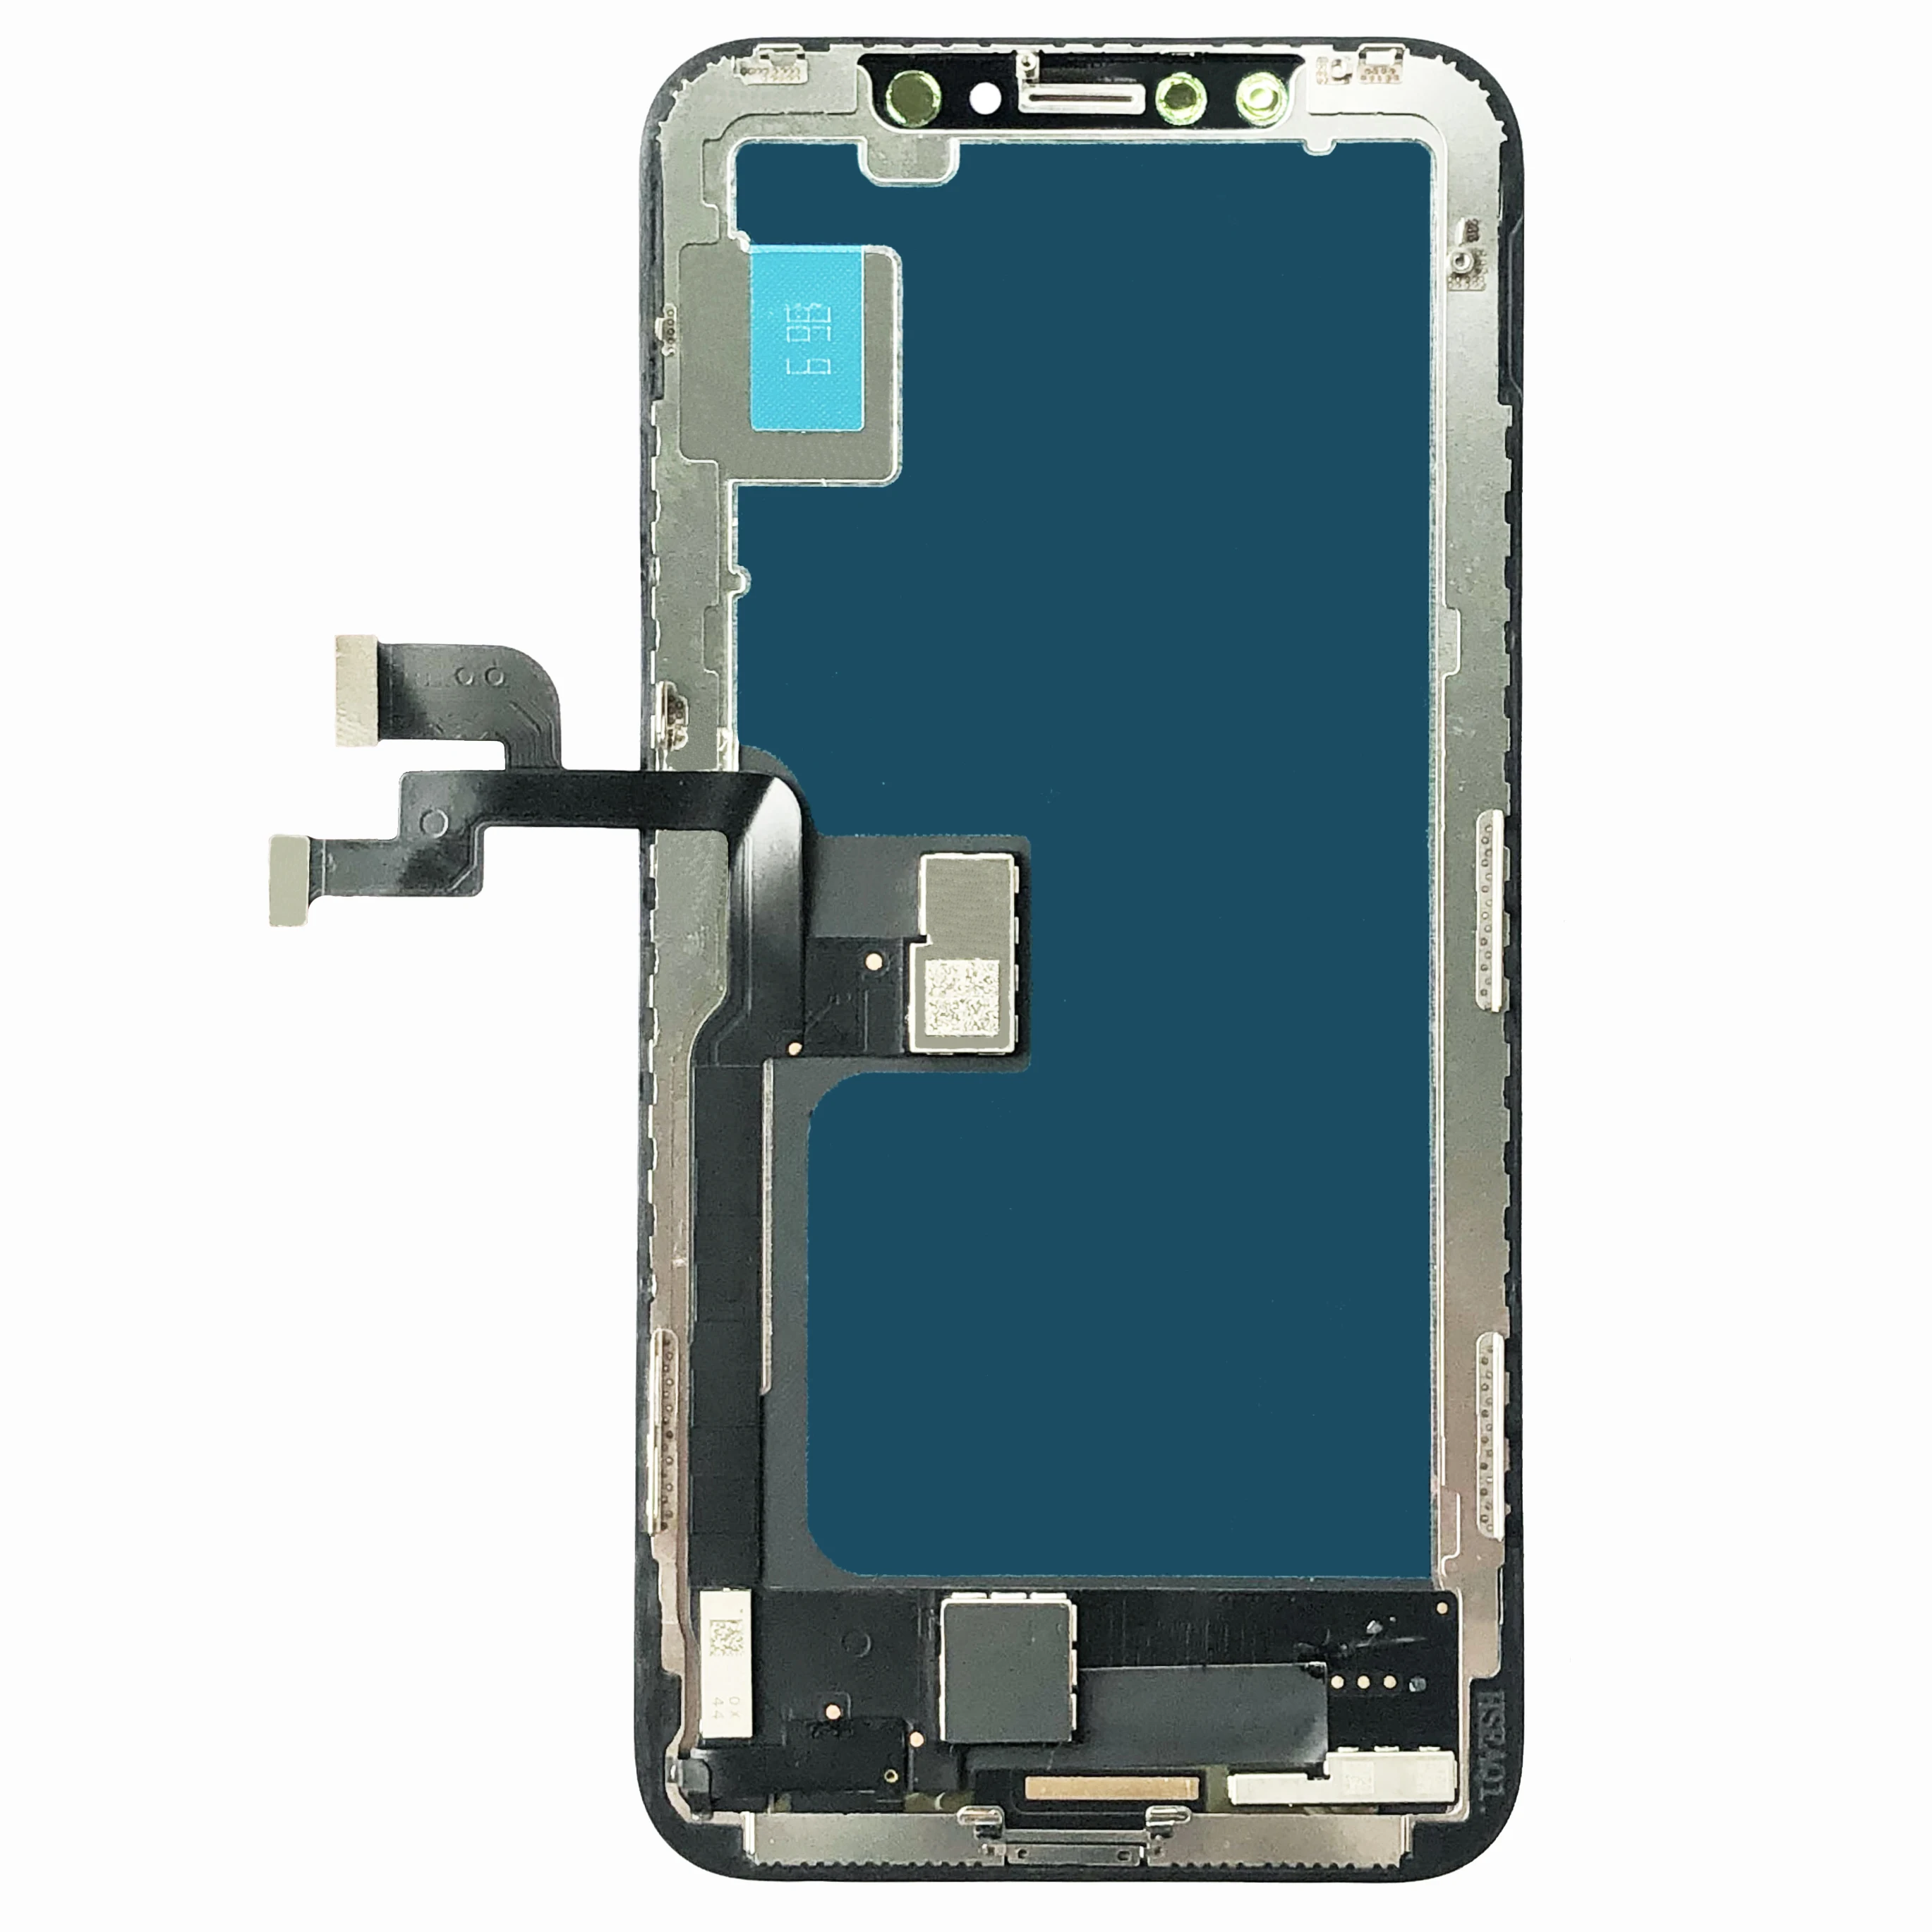 High quality AAA For iPhone X incell LCD Display For IPhone XS XR MAX  LCD 11 Touch Screen Digitizer Replacement Assembly Parts